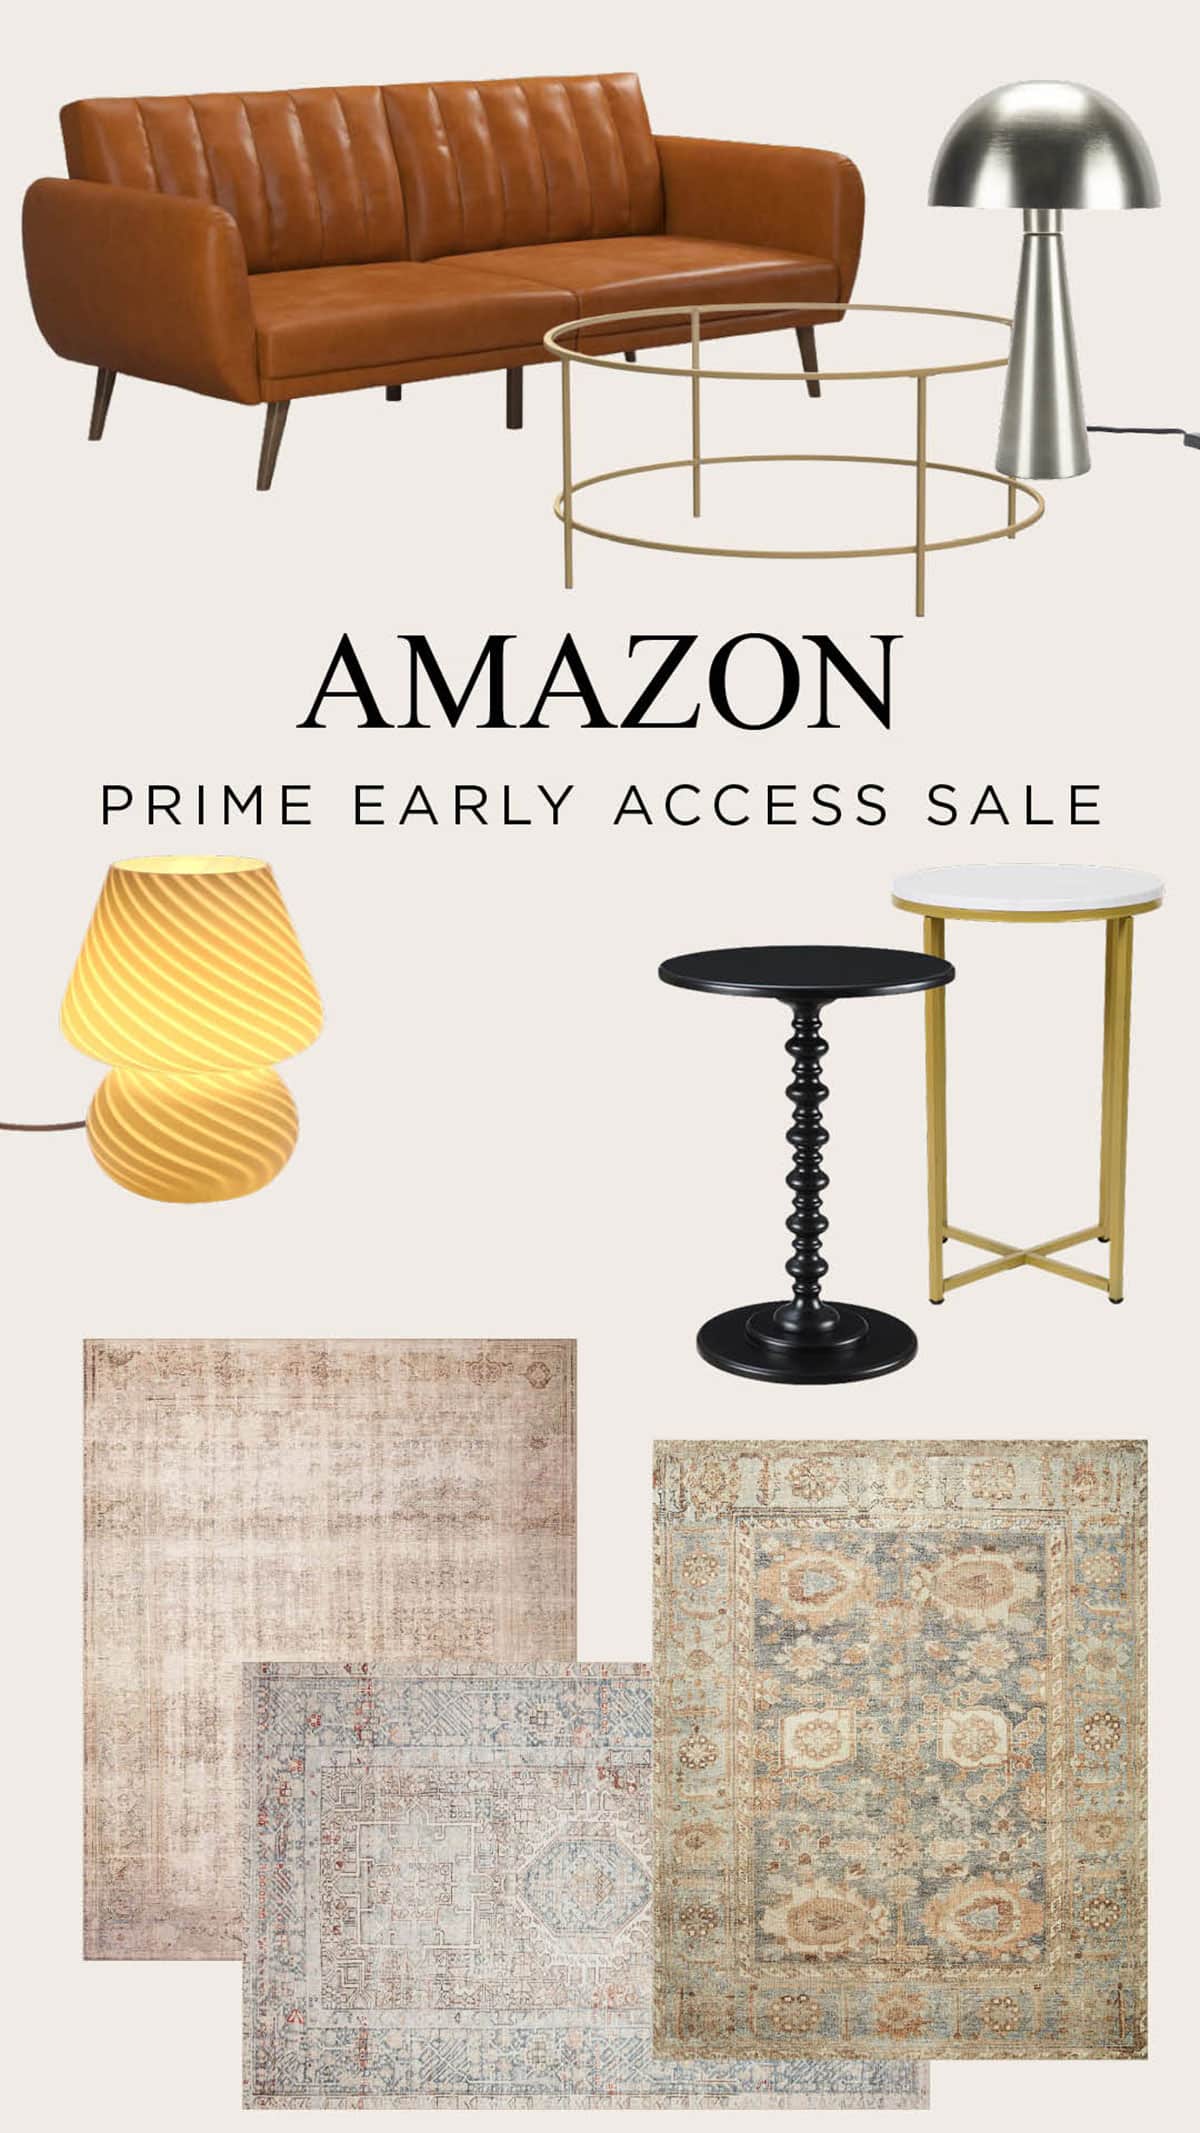 Amazon Prime Early Access Sale best of home decor